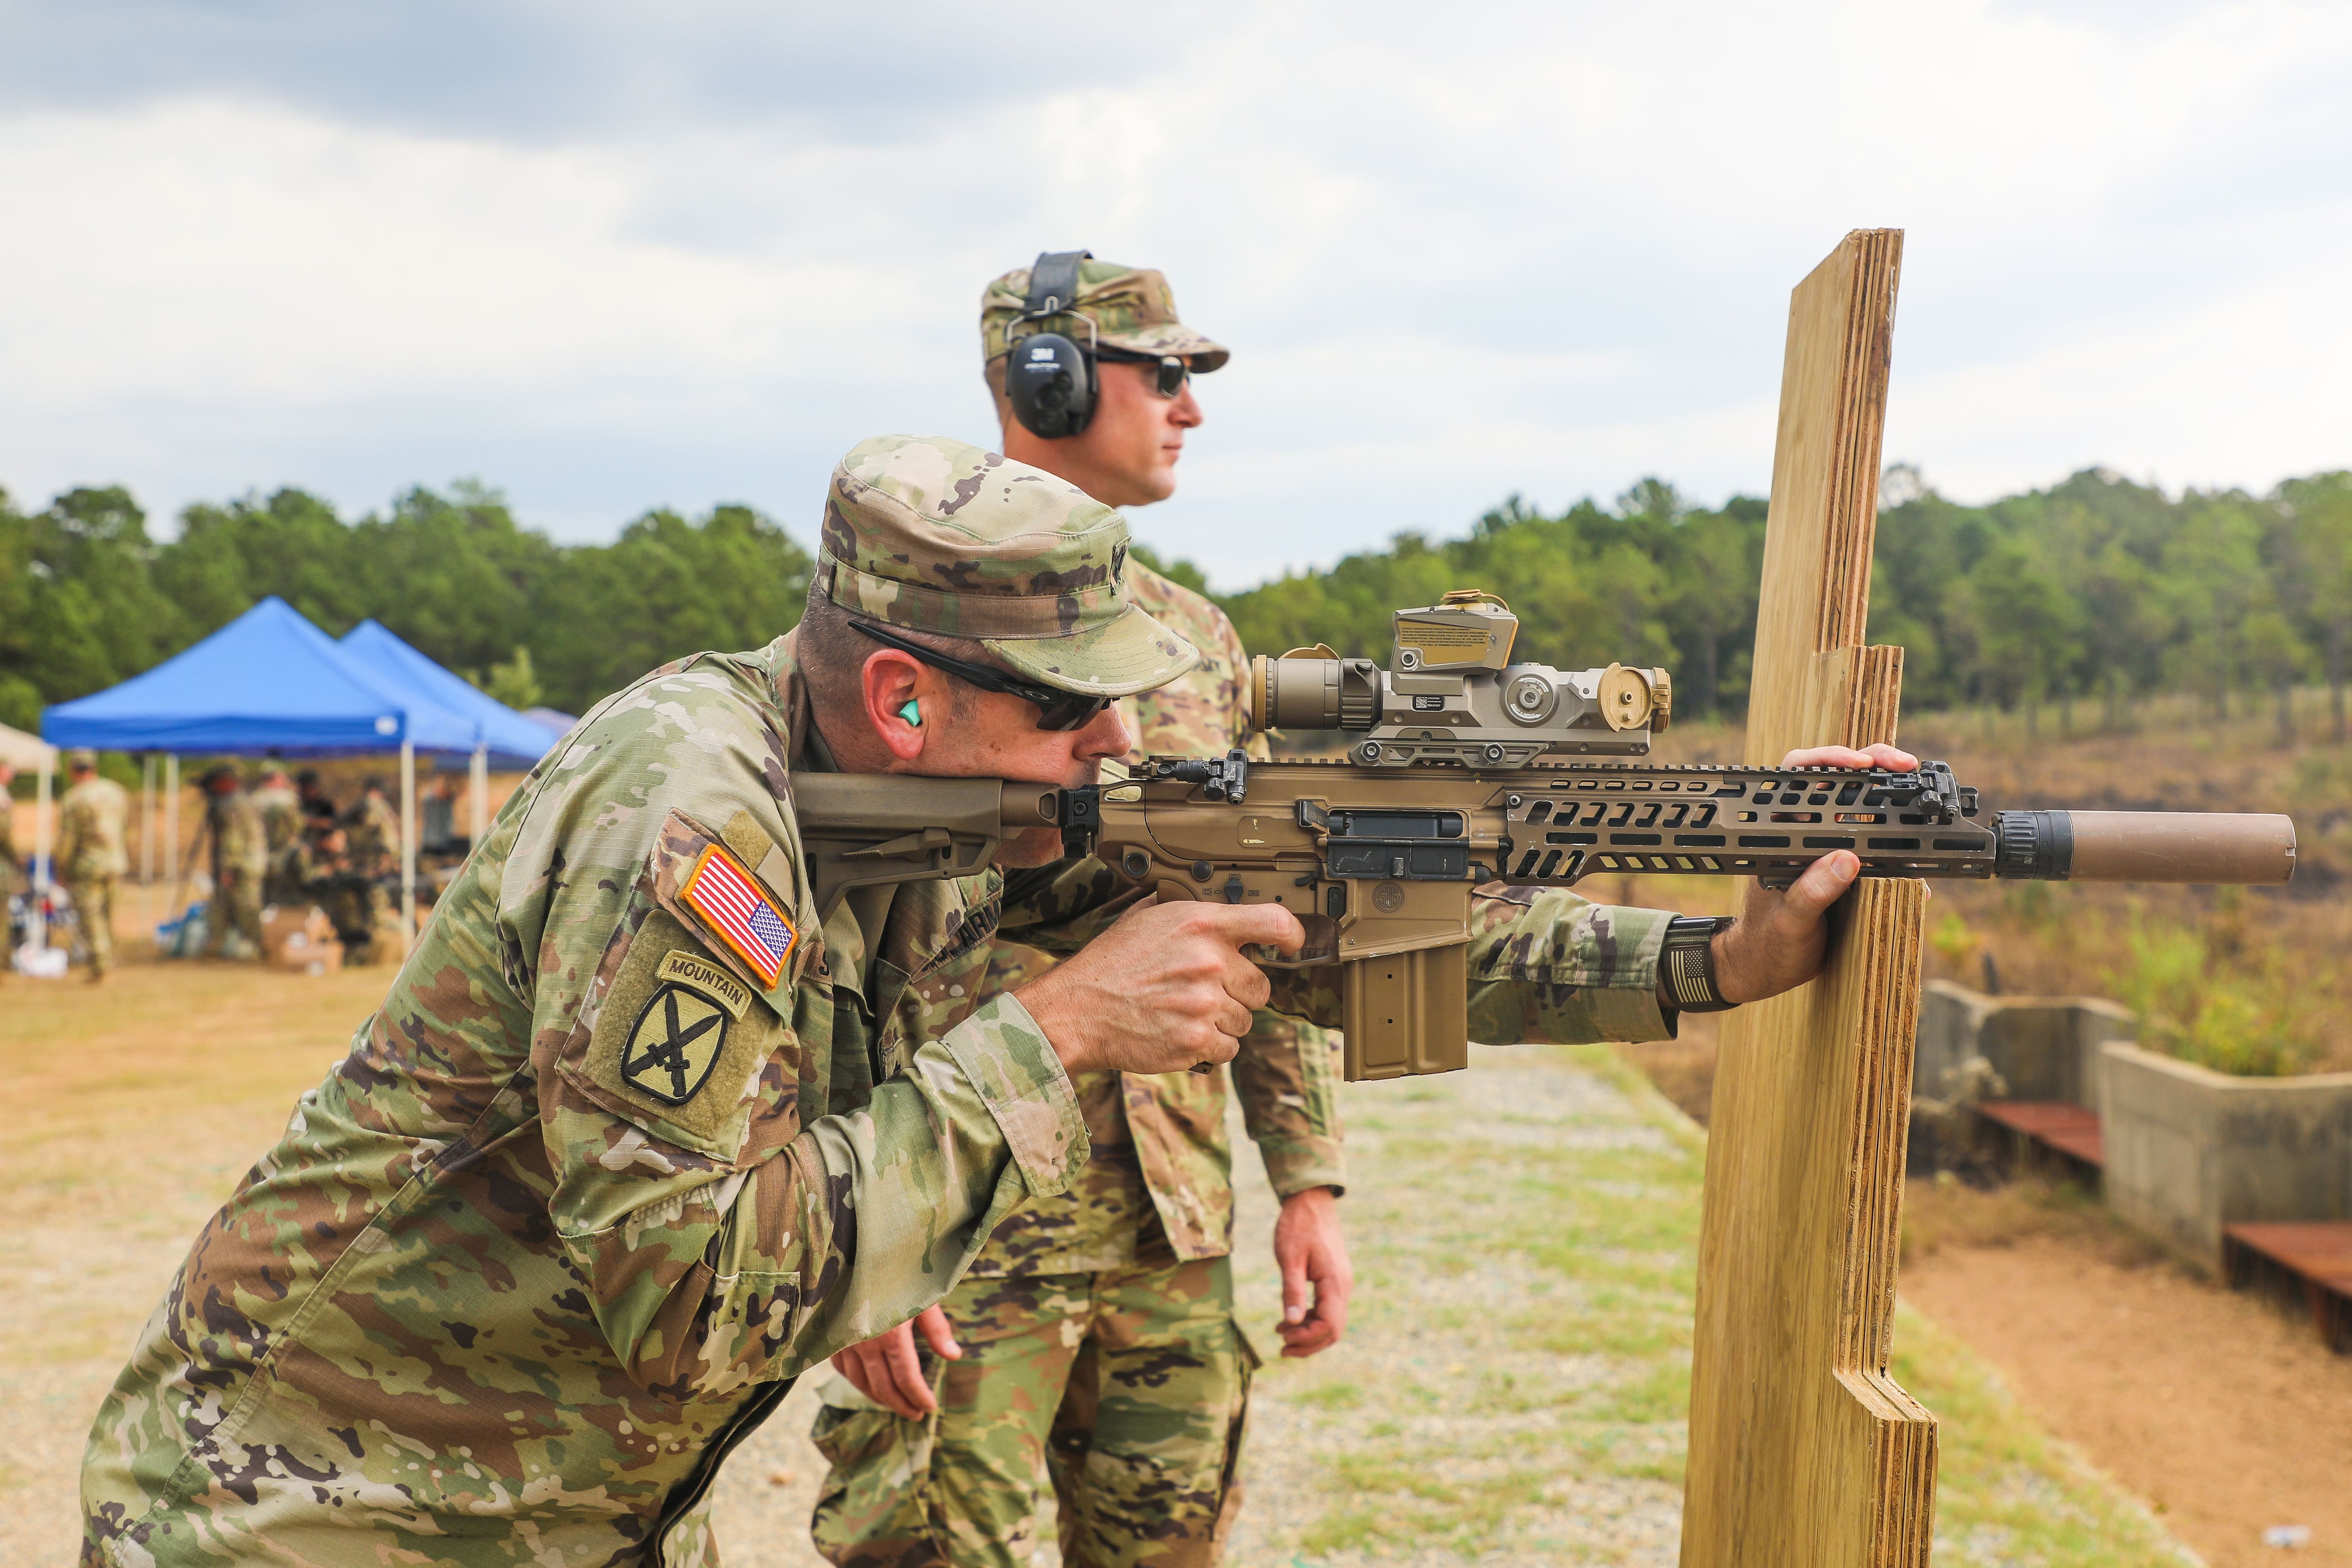 Fort Moore  International Sniper Competition